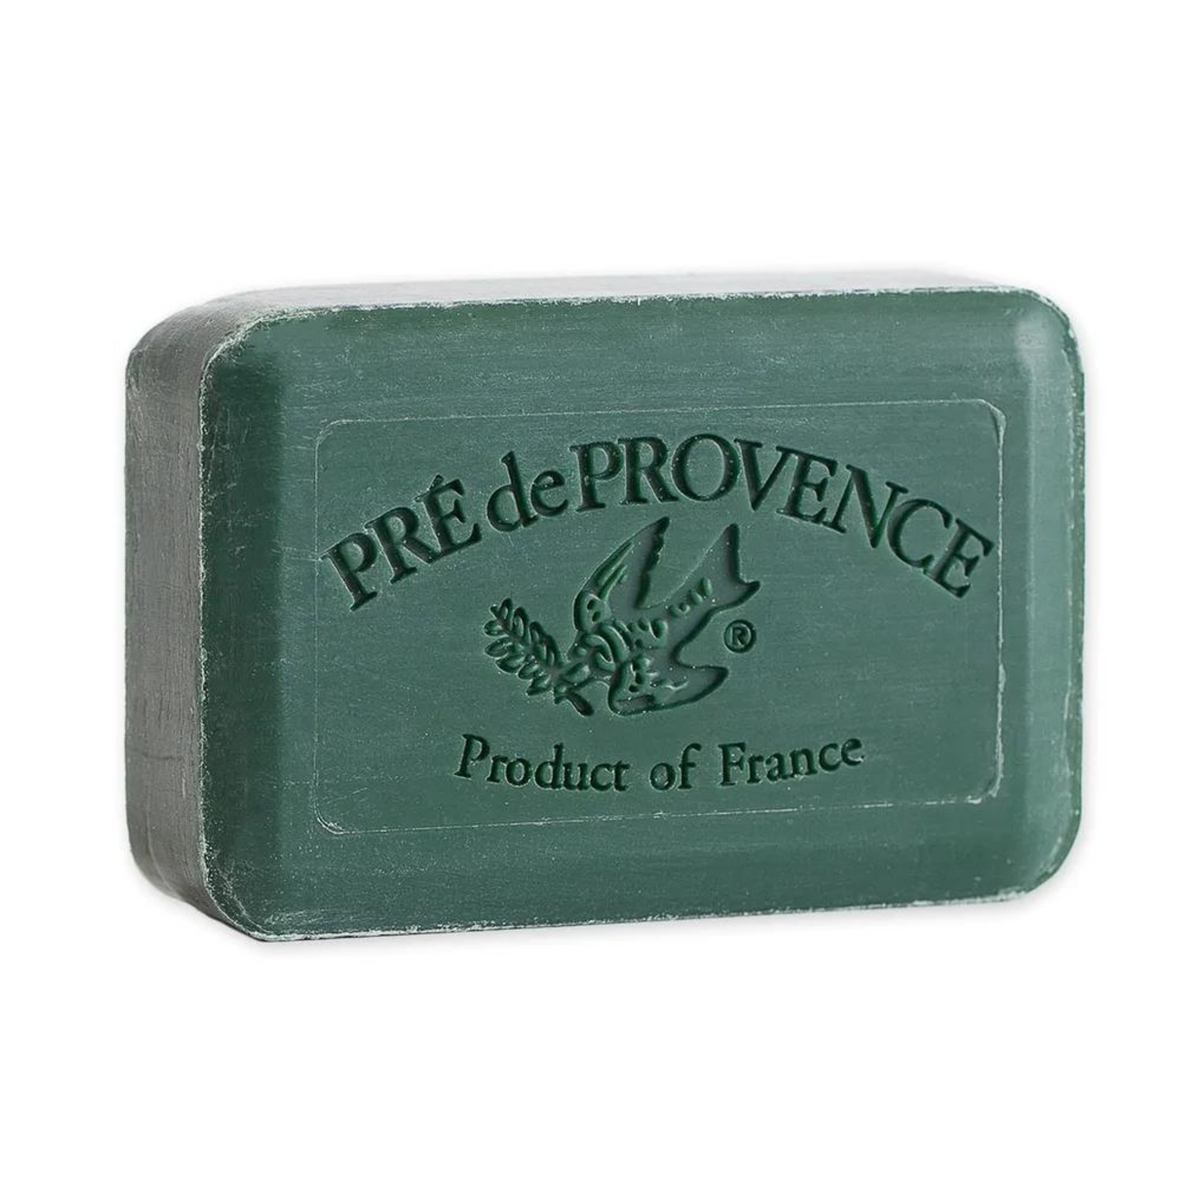 Primary Image of Pre de Provence Noble Fir Soap (150 g)